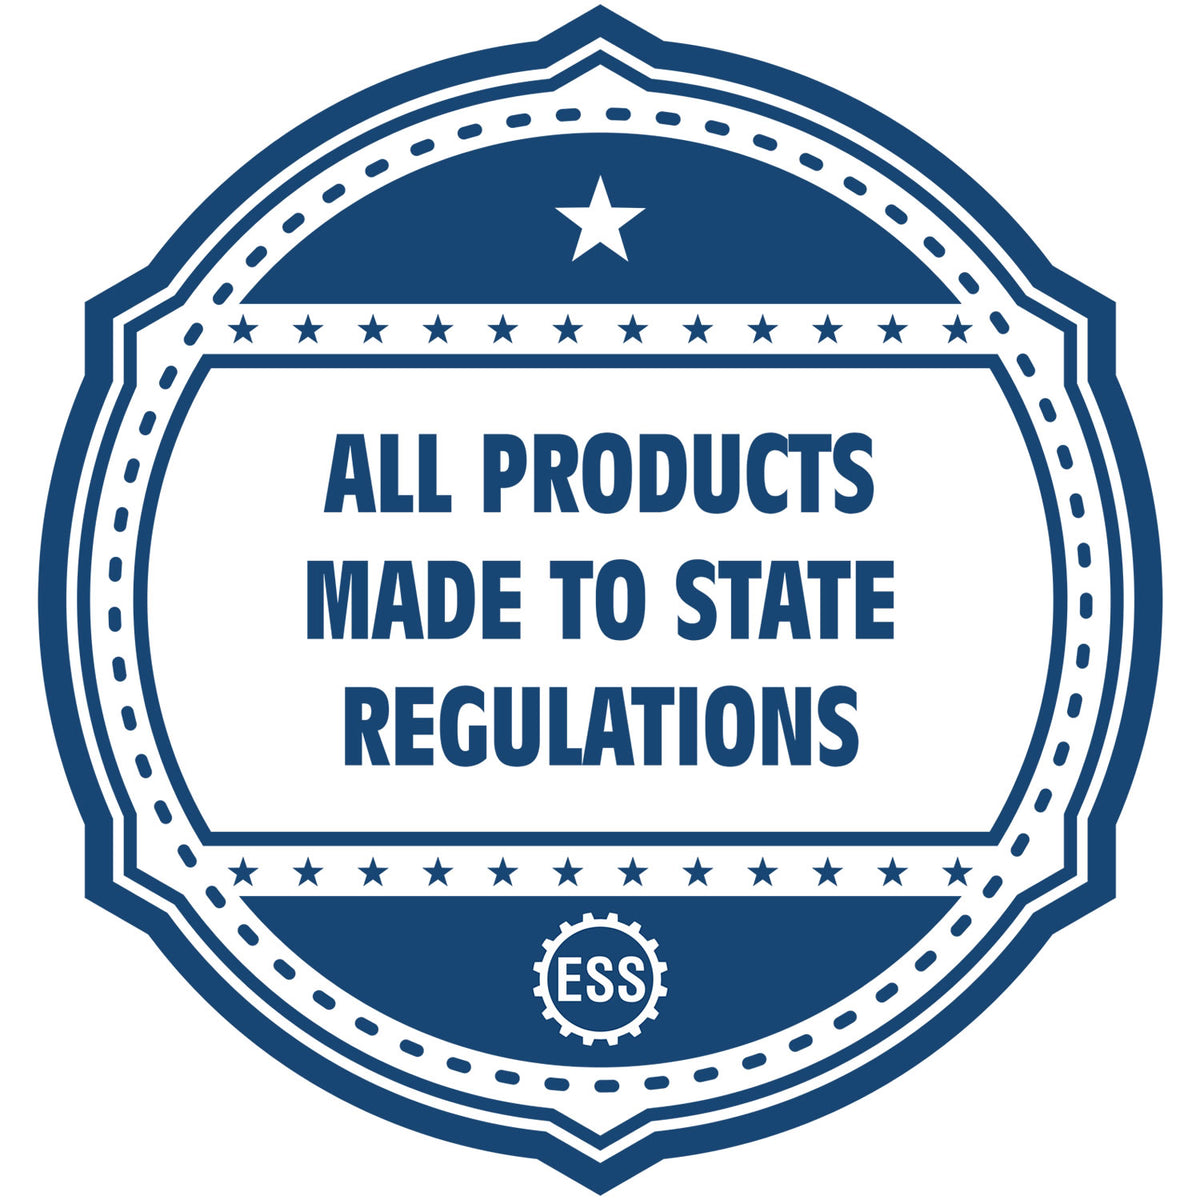 An icon or badge element for the State of Illinois Architectural Seal Embosser showing that this product is made in compliance with state regulations.